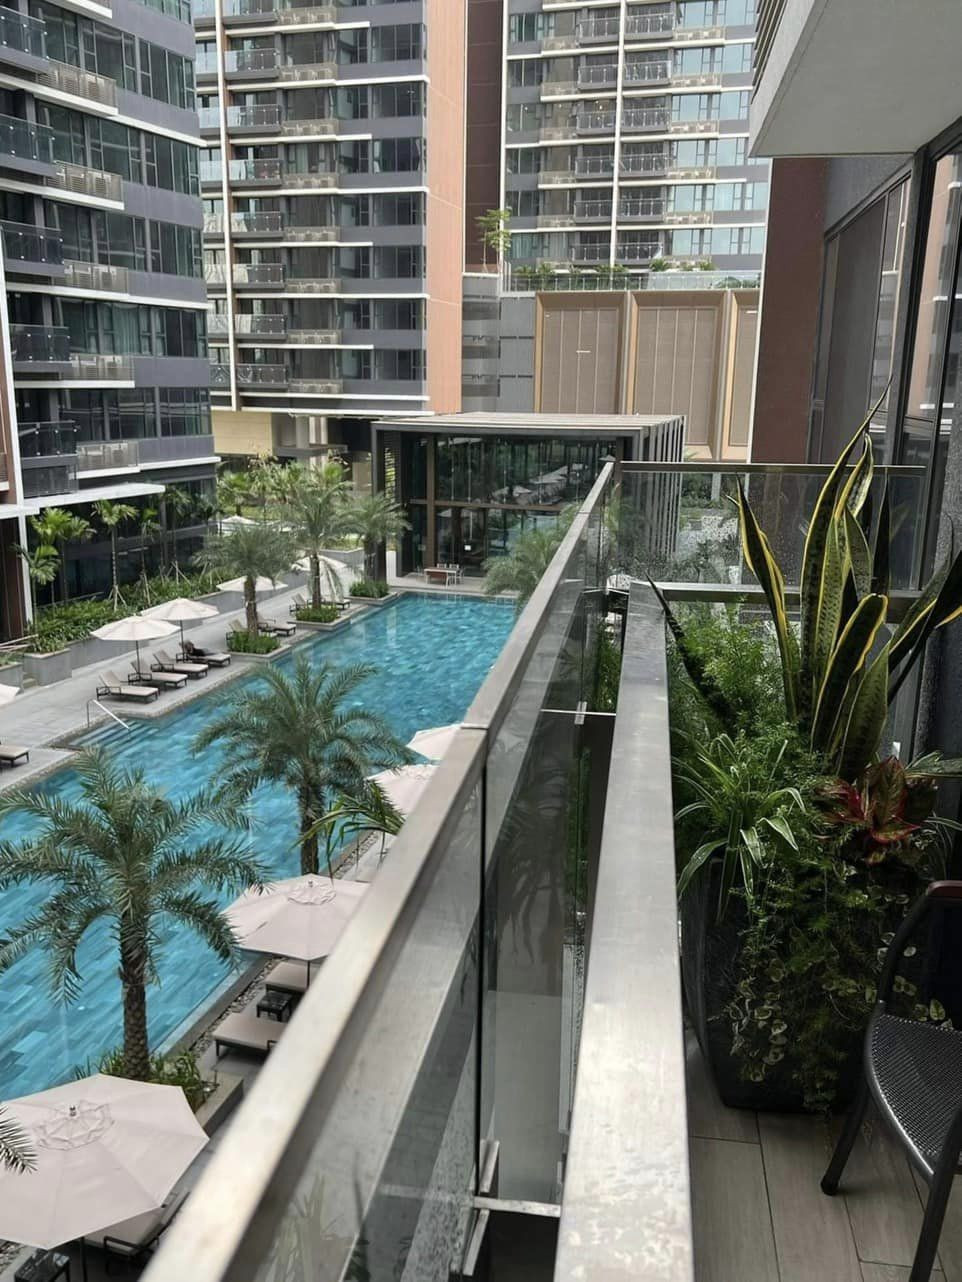 THE RIVER - The largest 2-bedroom apartment with the lowest price in the Thu Thiem area for Sale